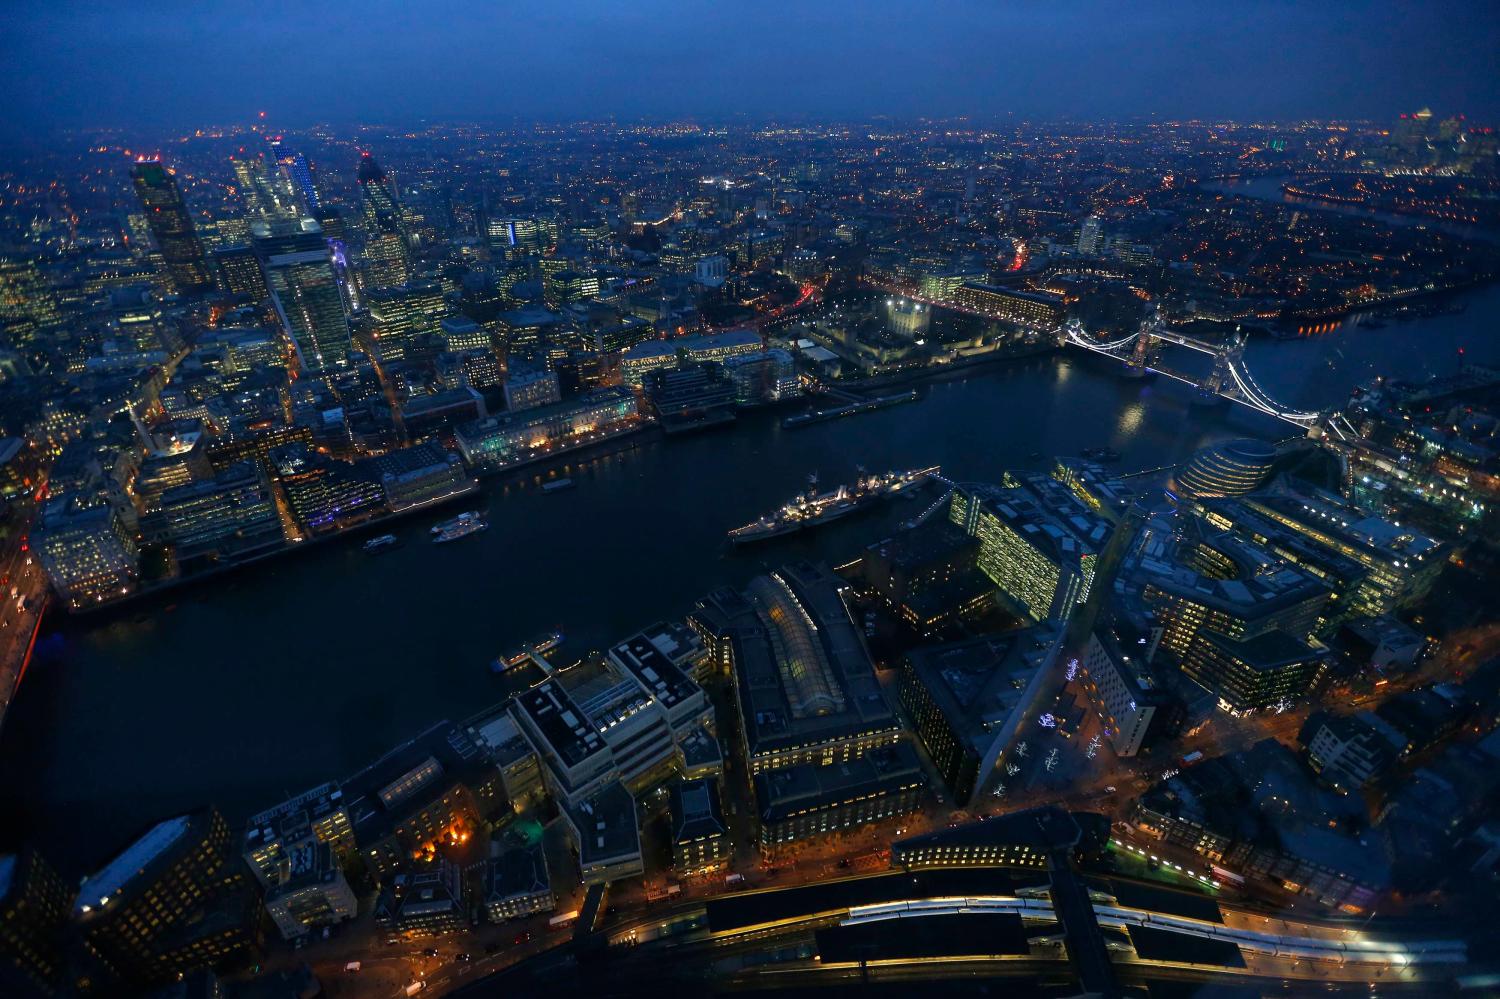 Tower Bridge and the museum warship HMS Belfast are seen at dusk in an aerial photograph from The View gallery at the Shard, western Europe's tallest building, in London